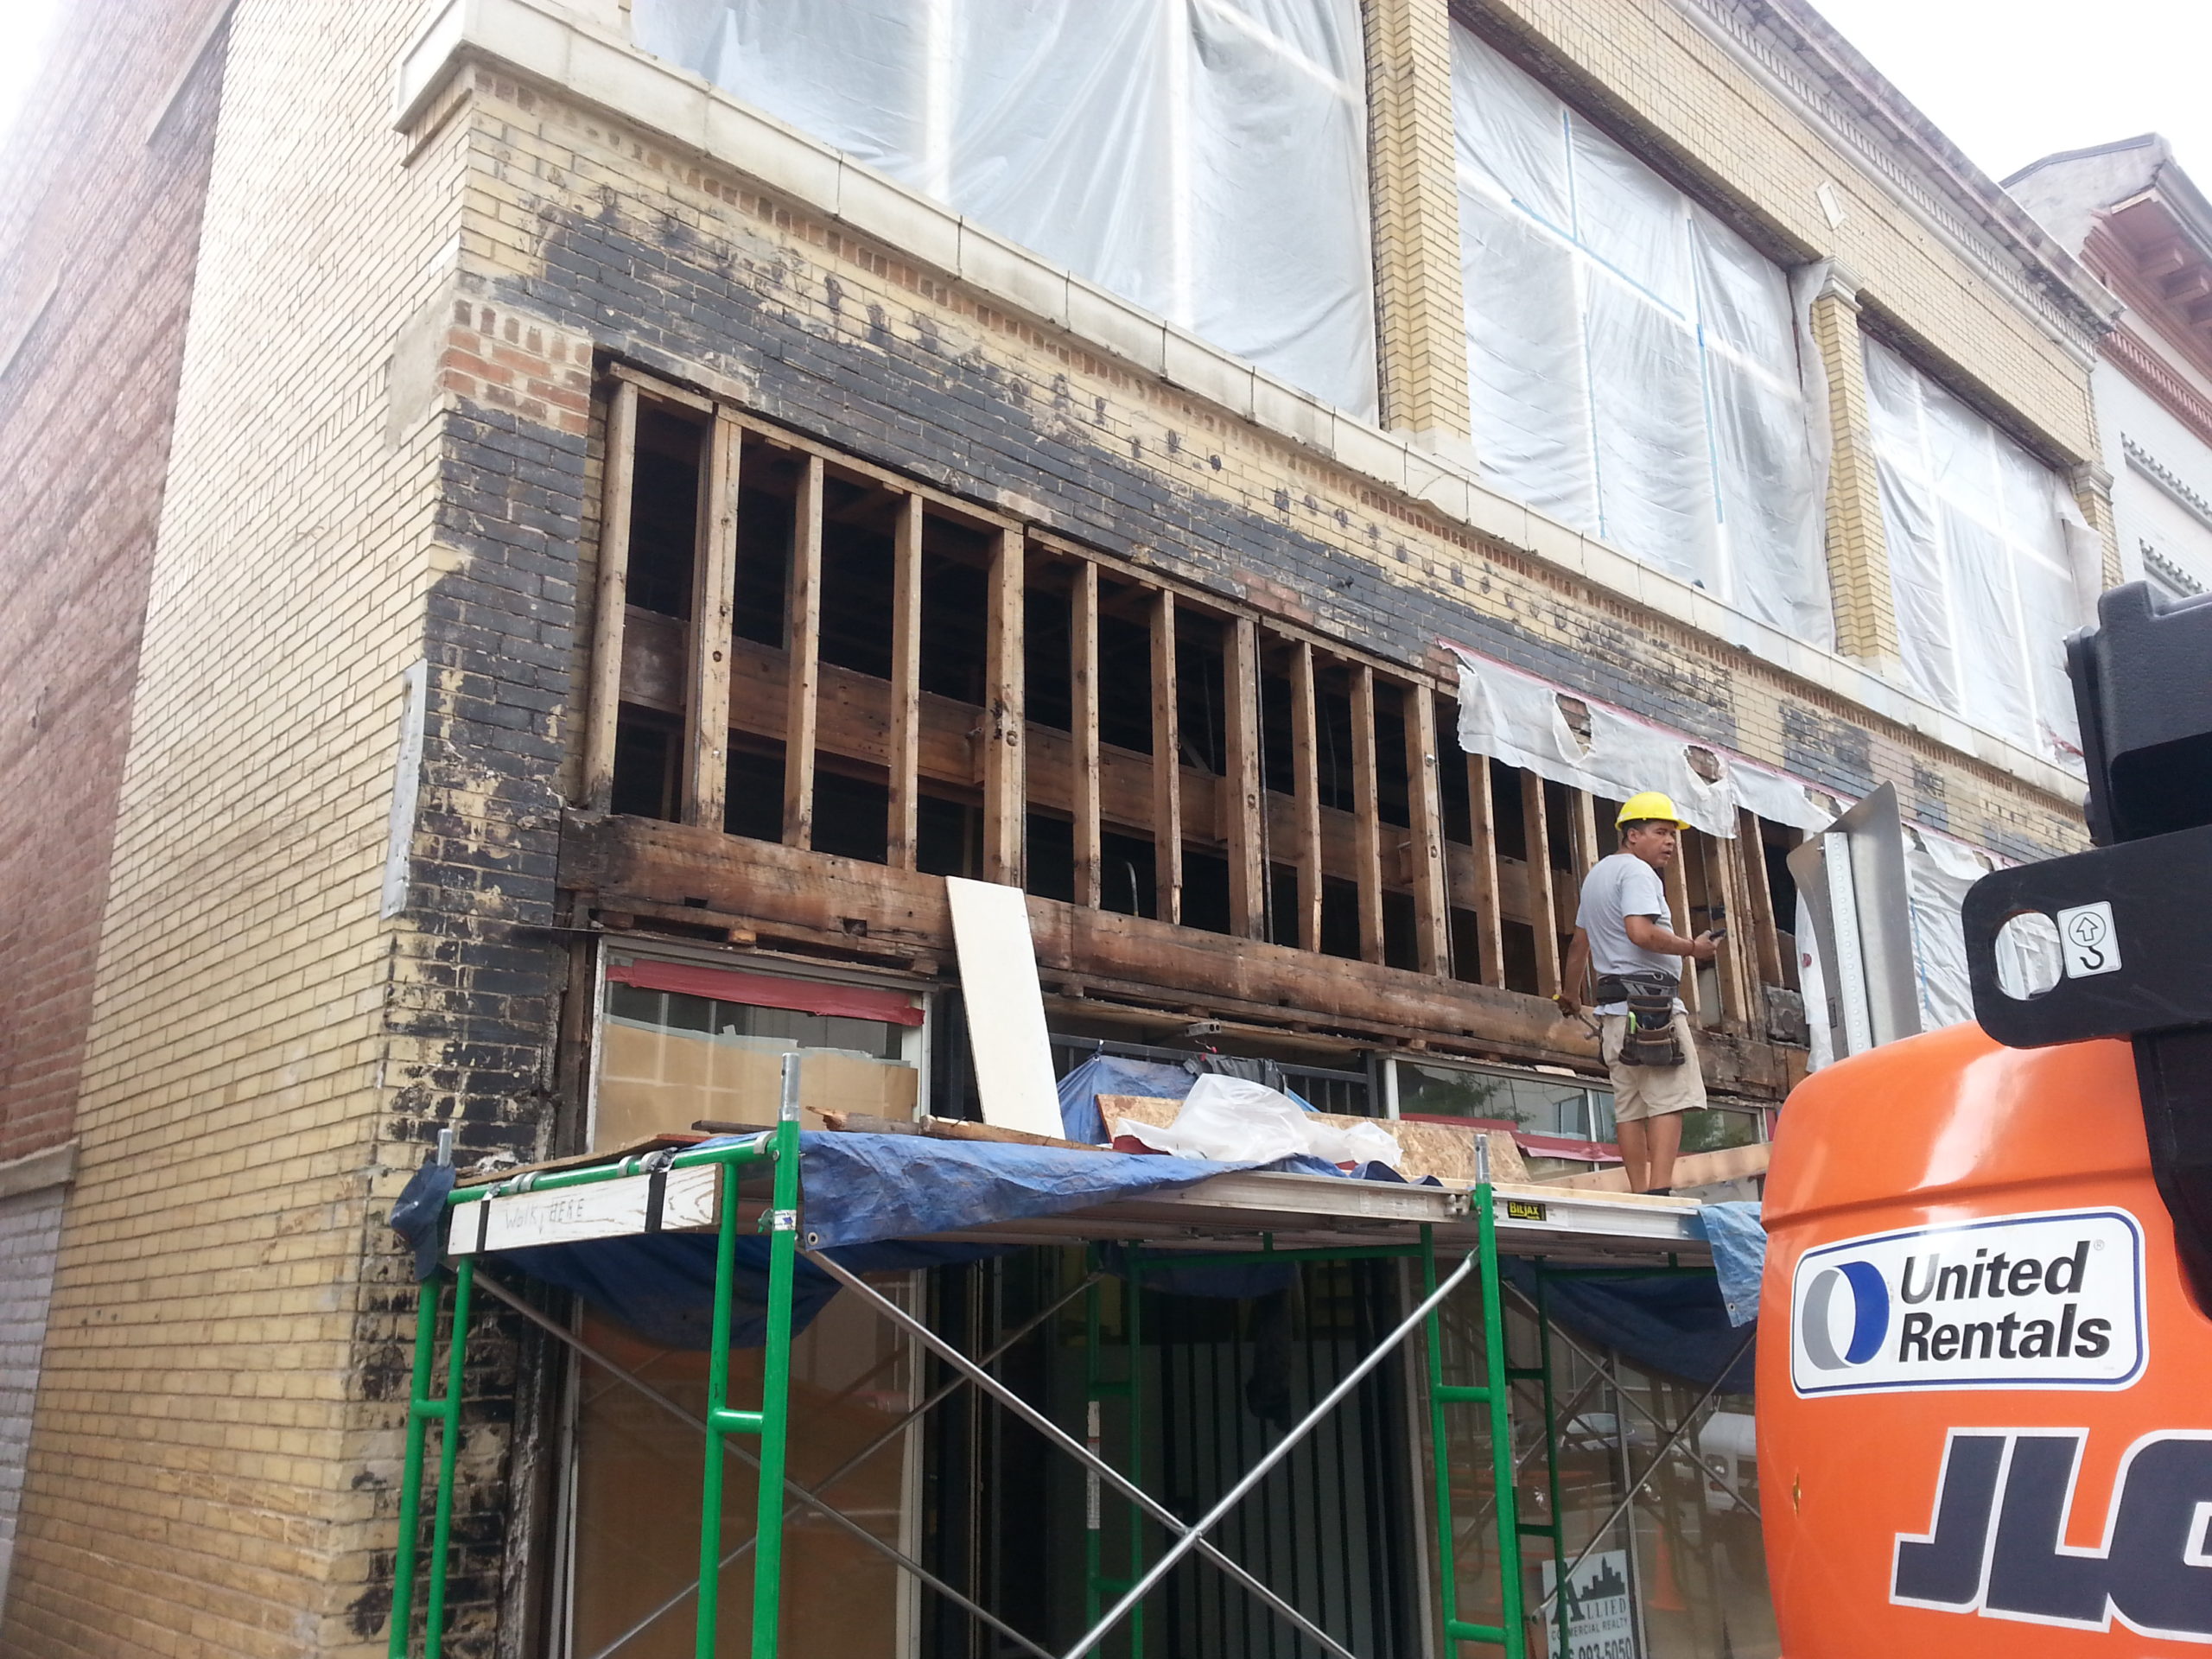 Liberty street building remodel tore up